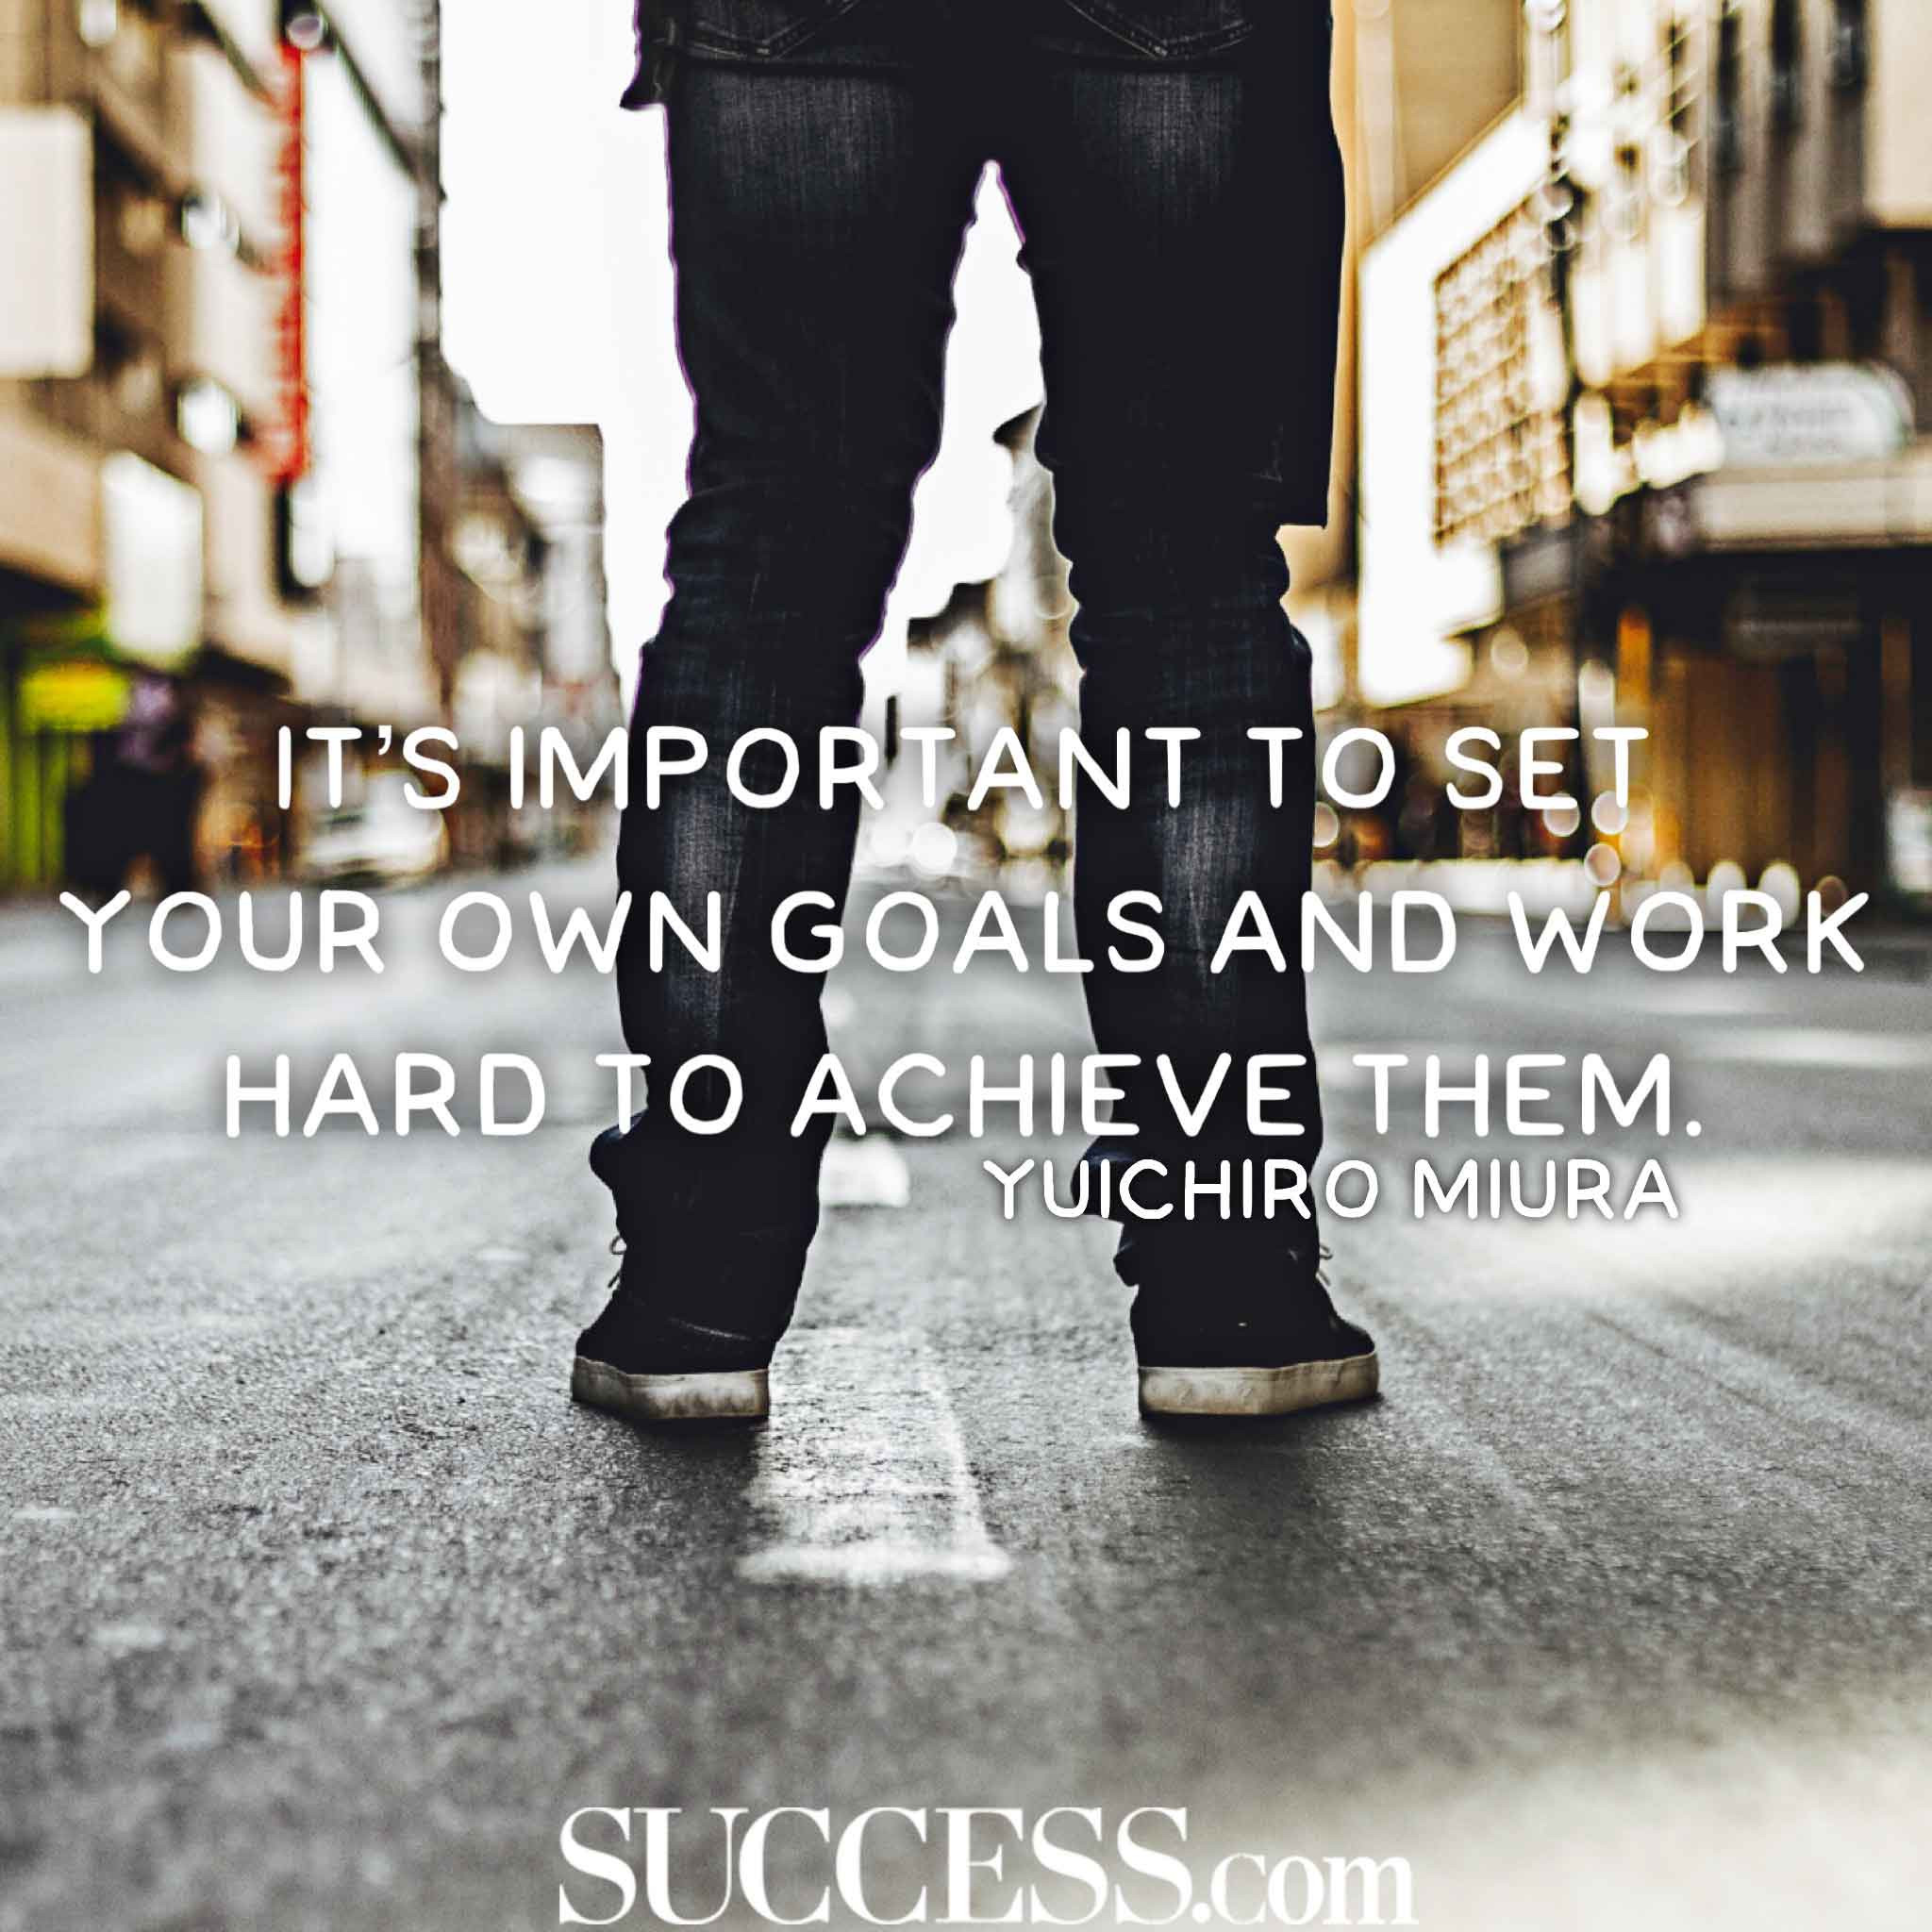 Inspirational Quotes About Goals
 18 Motivational Quotes About Successful Goal Setting